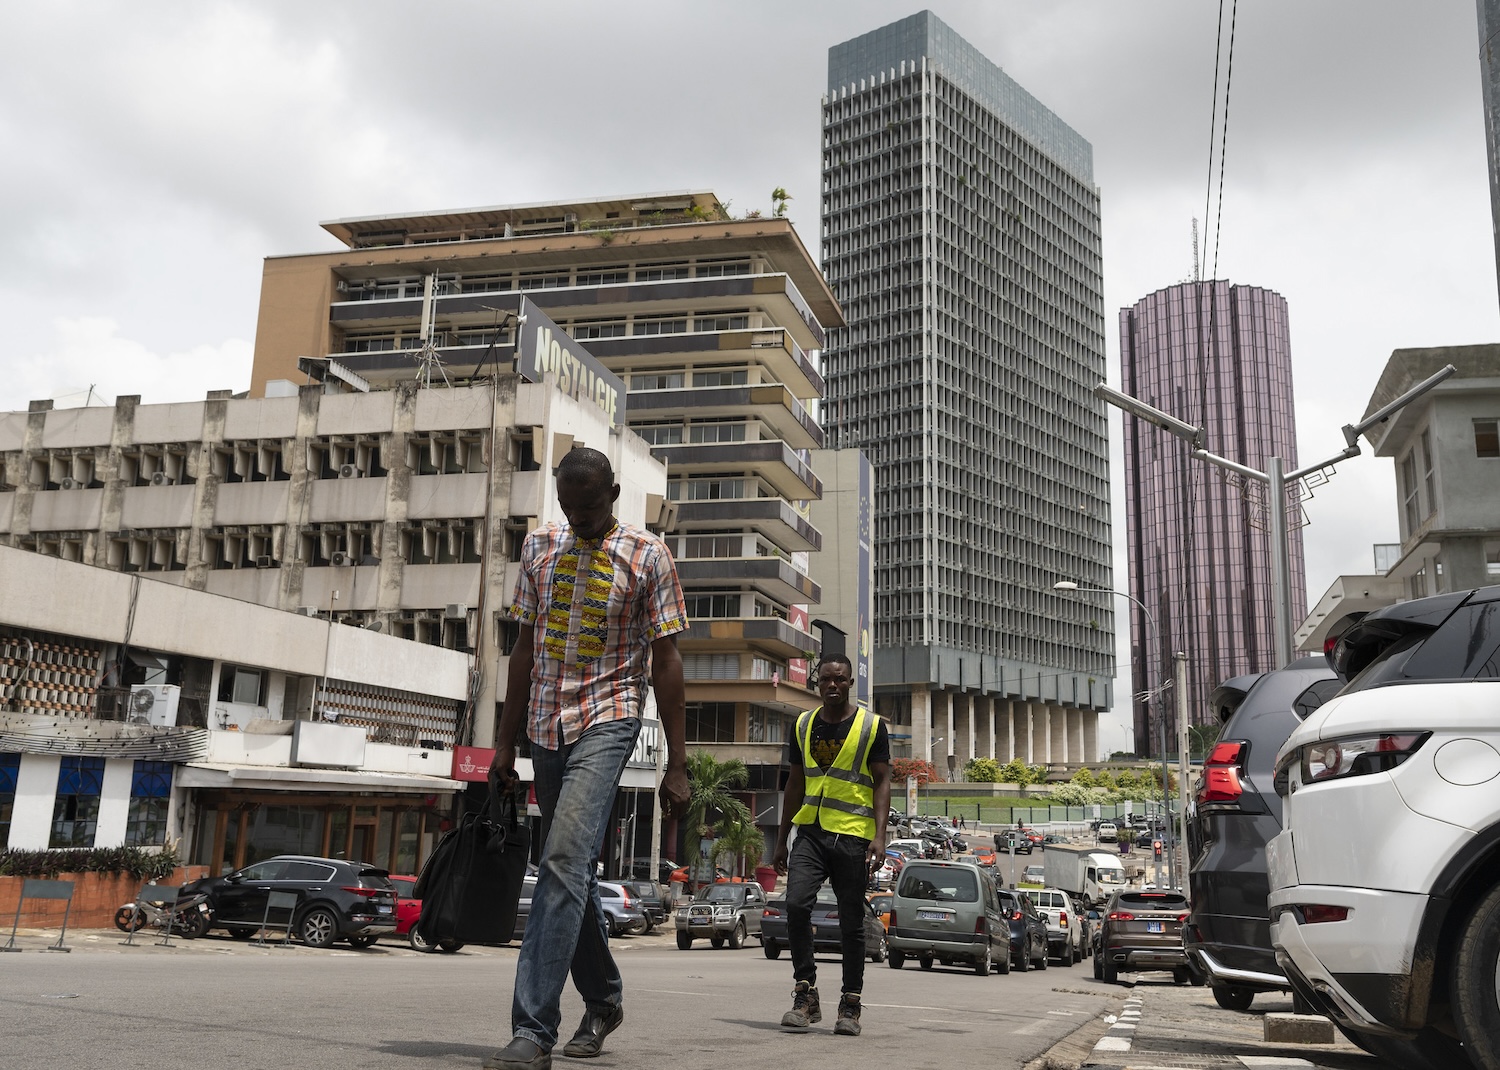 Two men walk up the road, with government buildings seen in the background, in the Plateau financial district in Abidjan, Cote d'Ivoire on April 4, 2022.